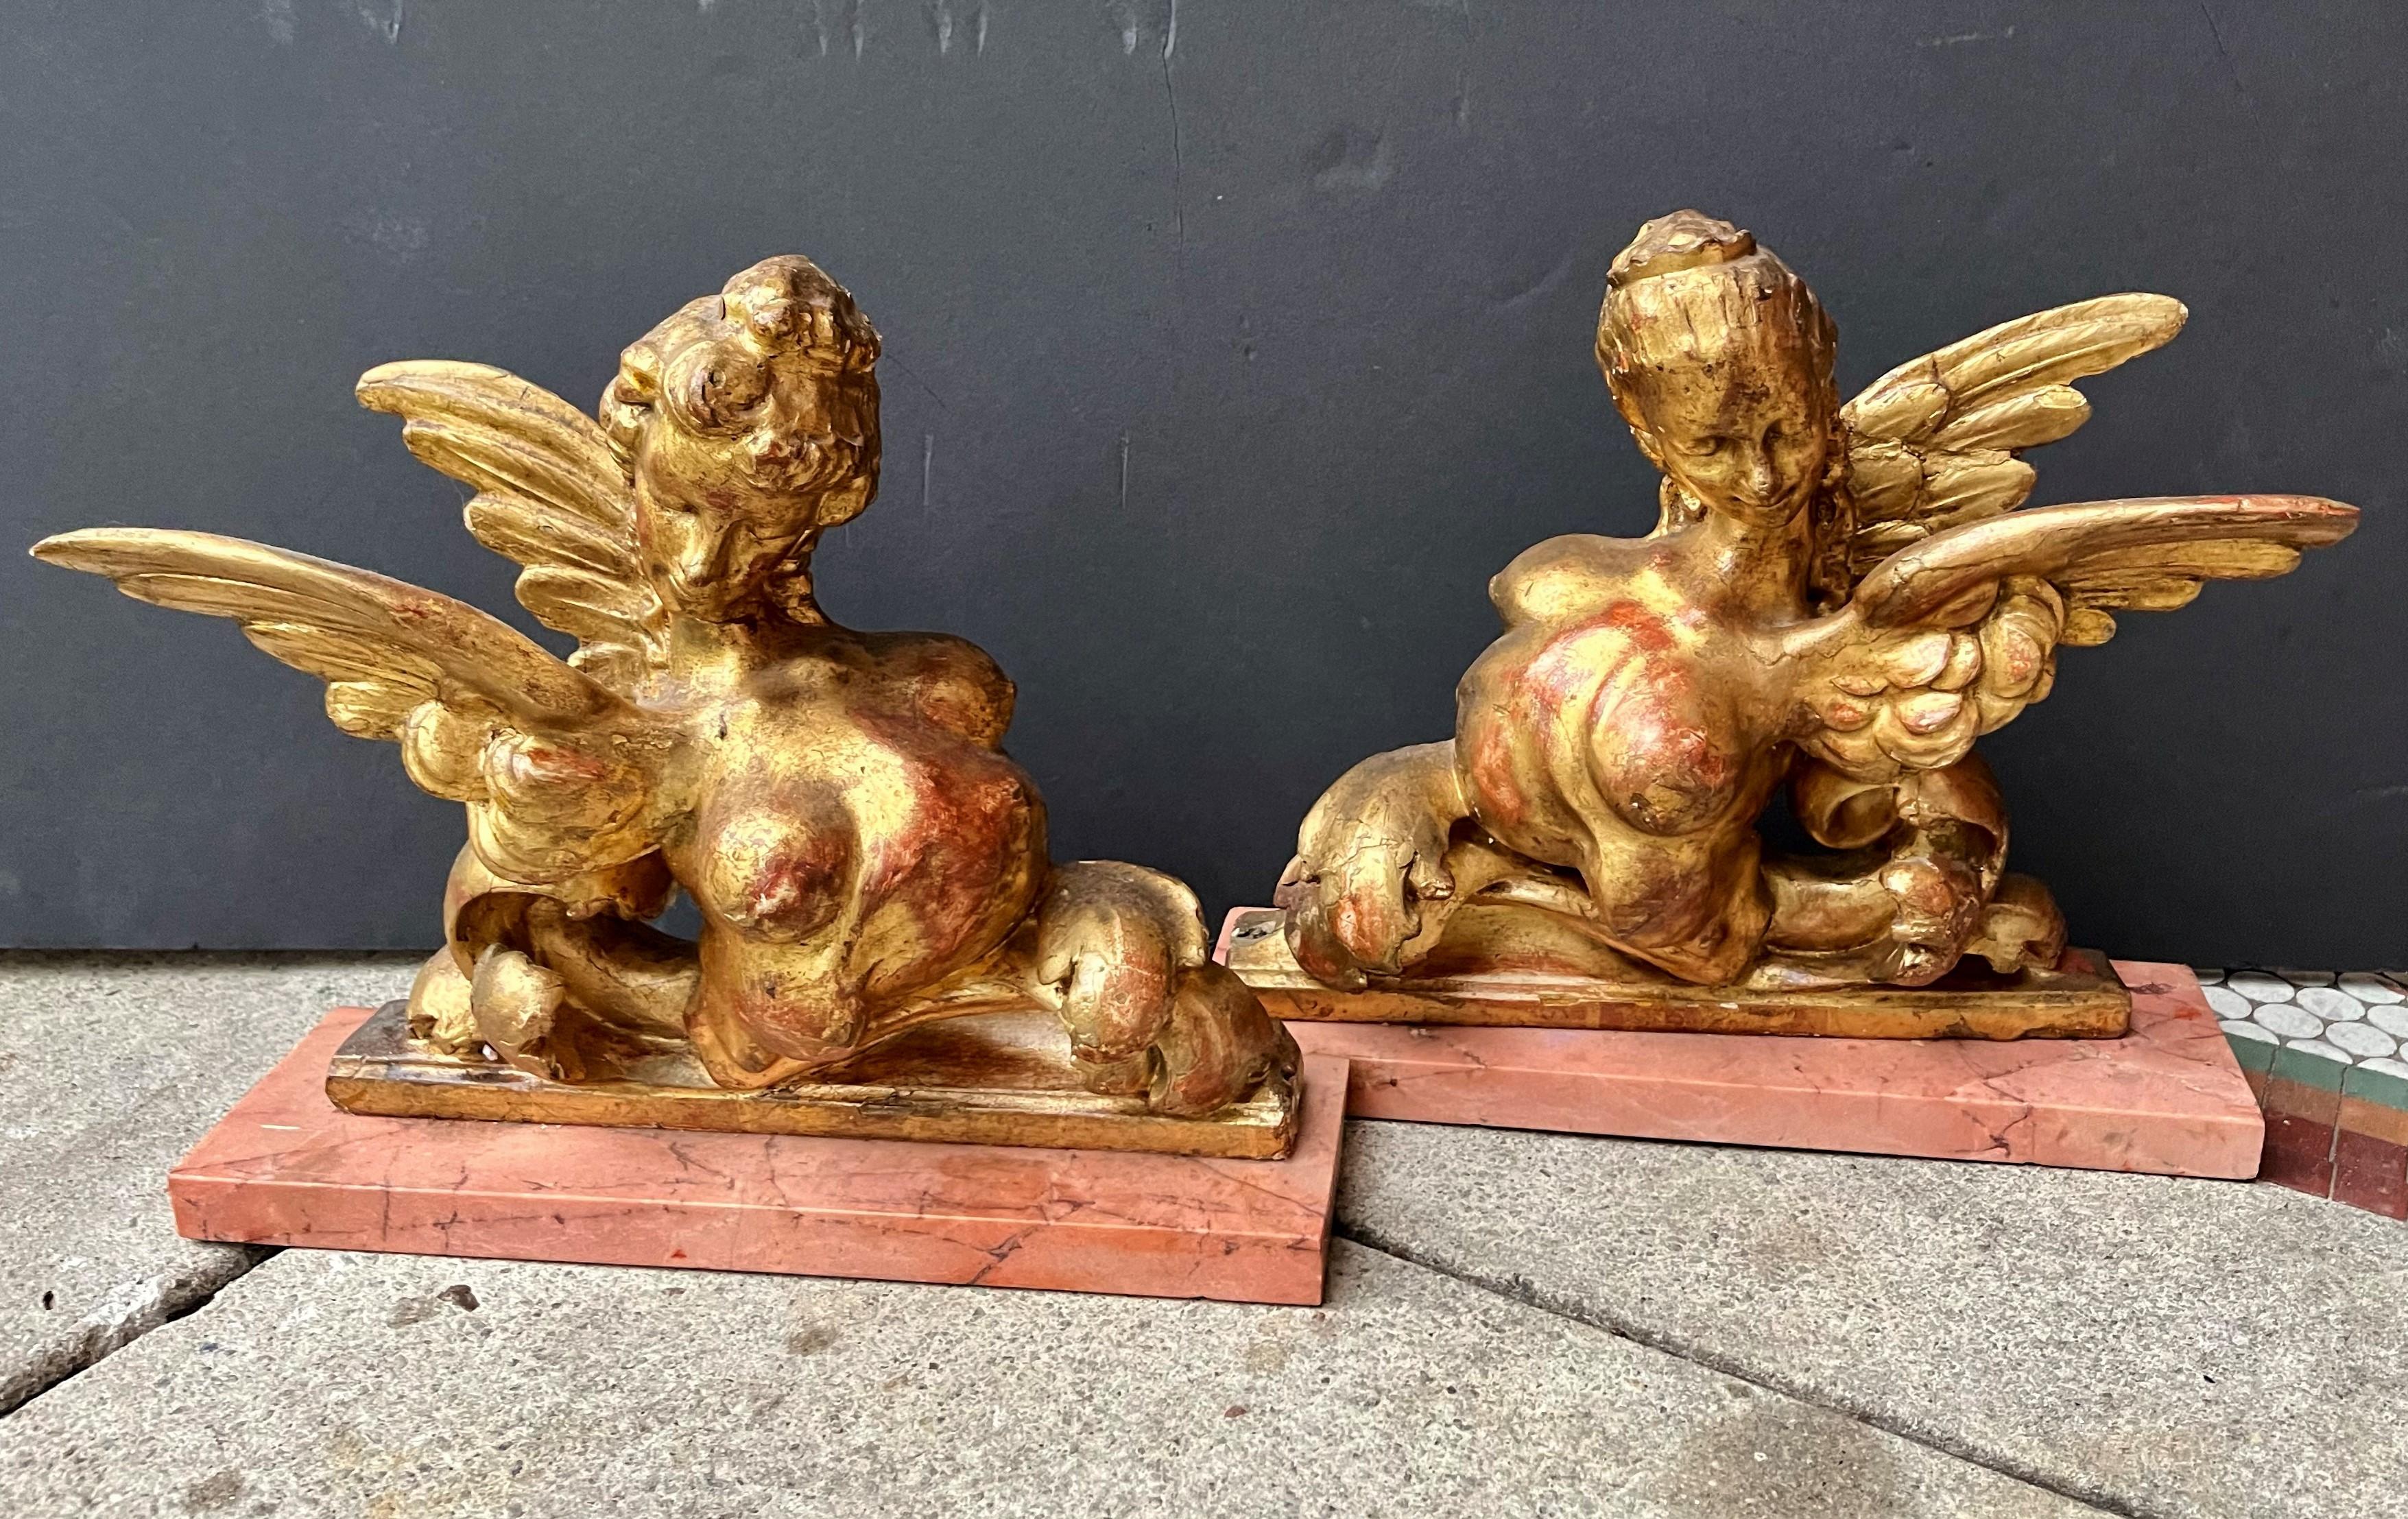 Probably Mdme. Pompadour and Mdme. DuBarry caricatures, popular motif in the 19th century. On coral colored marble bases, and probably of architectural origin. Great color contrast between red bole and gilding.

Usual aging issues with giltwood,